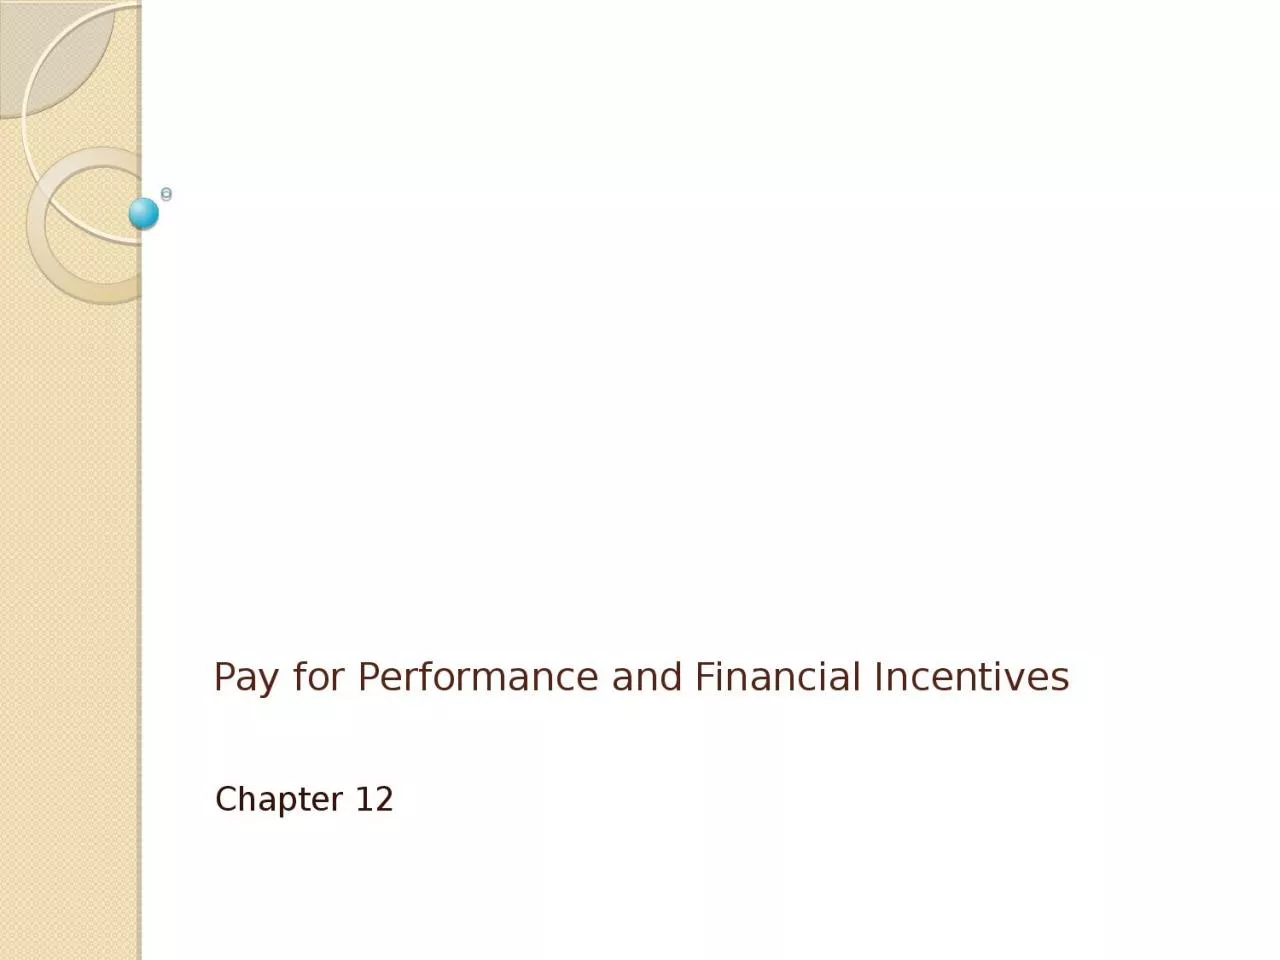 Pay for Performance and Financial Incentives